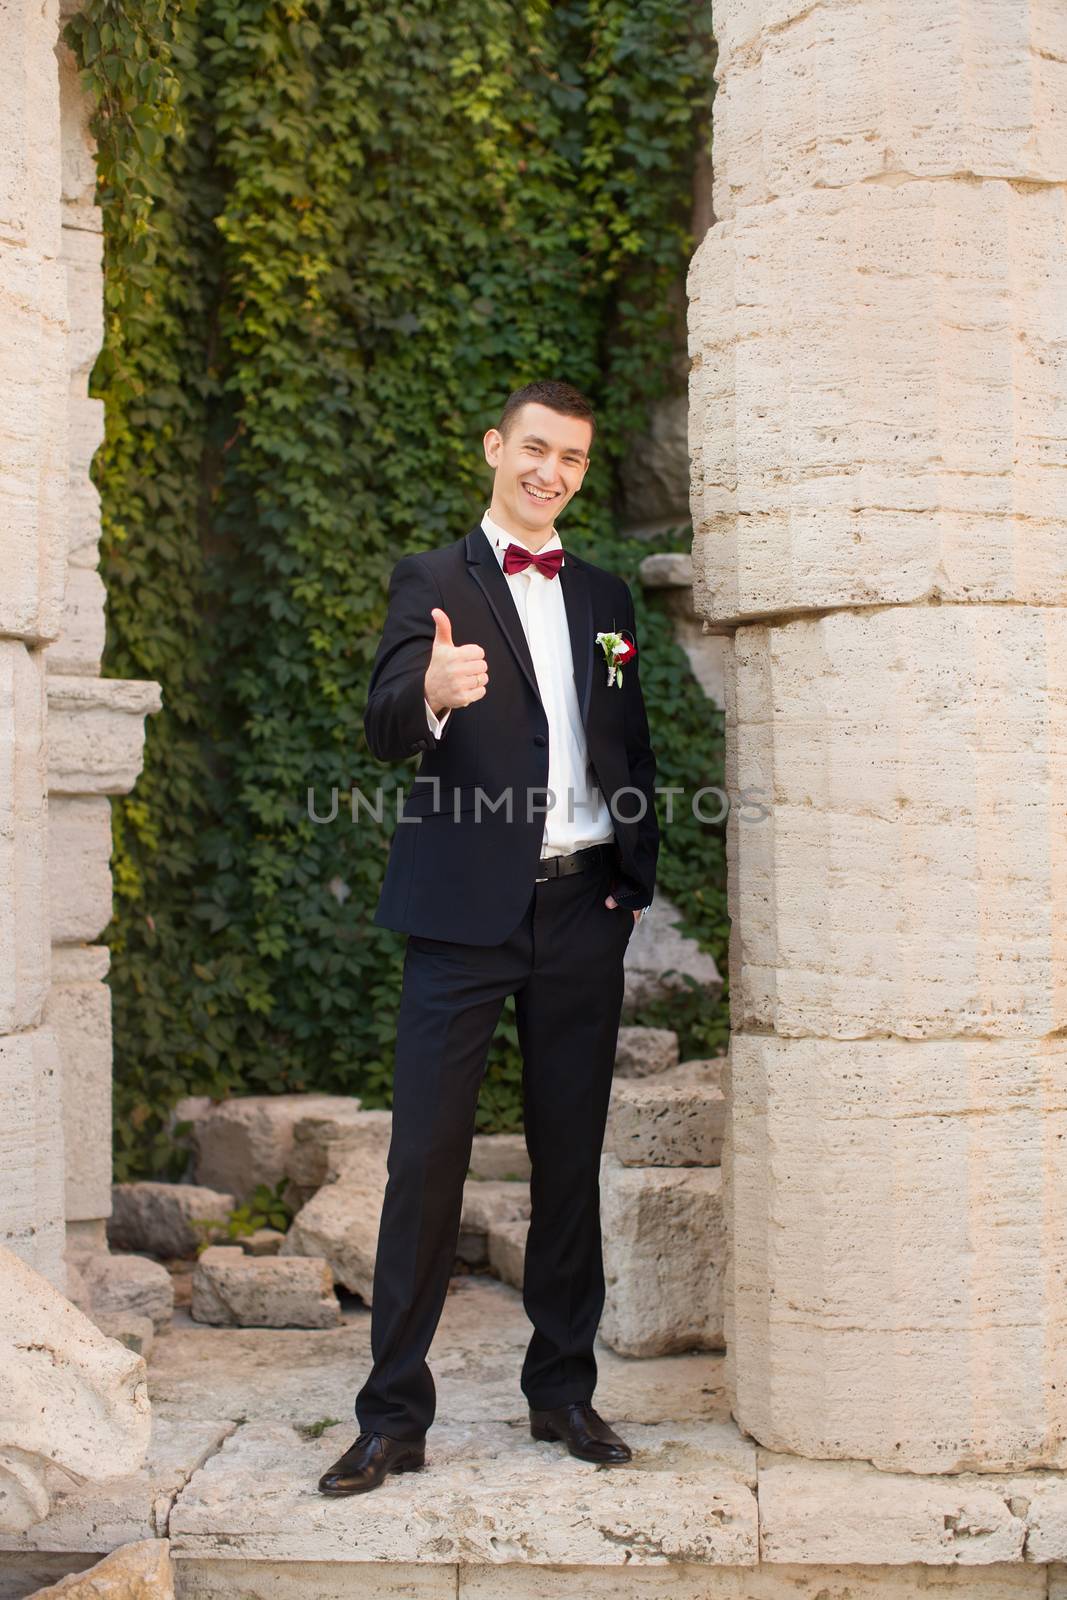 The groom holds a tie and smiles.Portrait of the groom in the park on their wedding day.